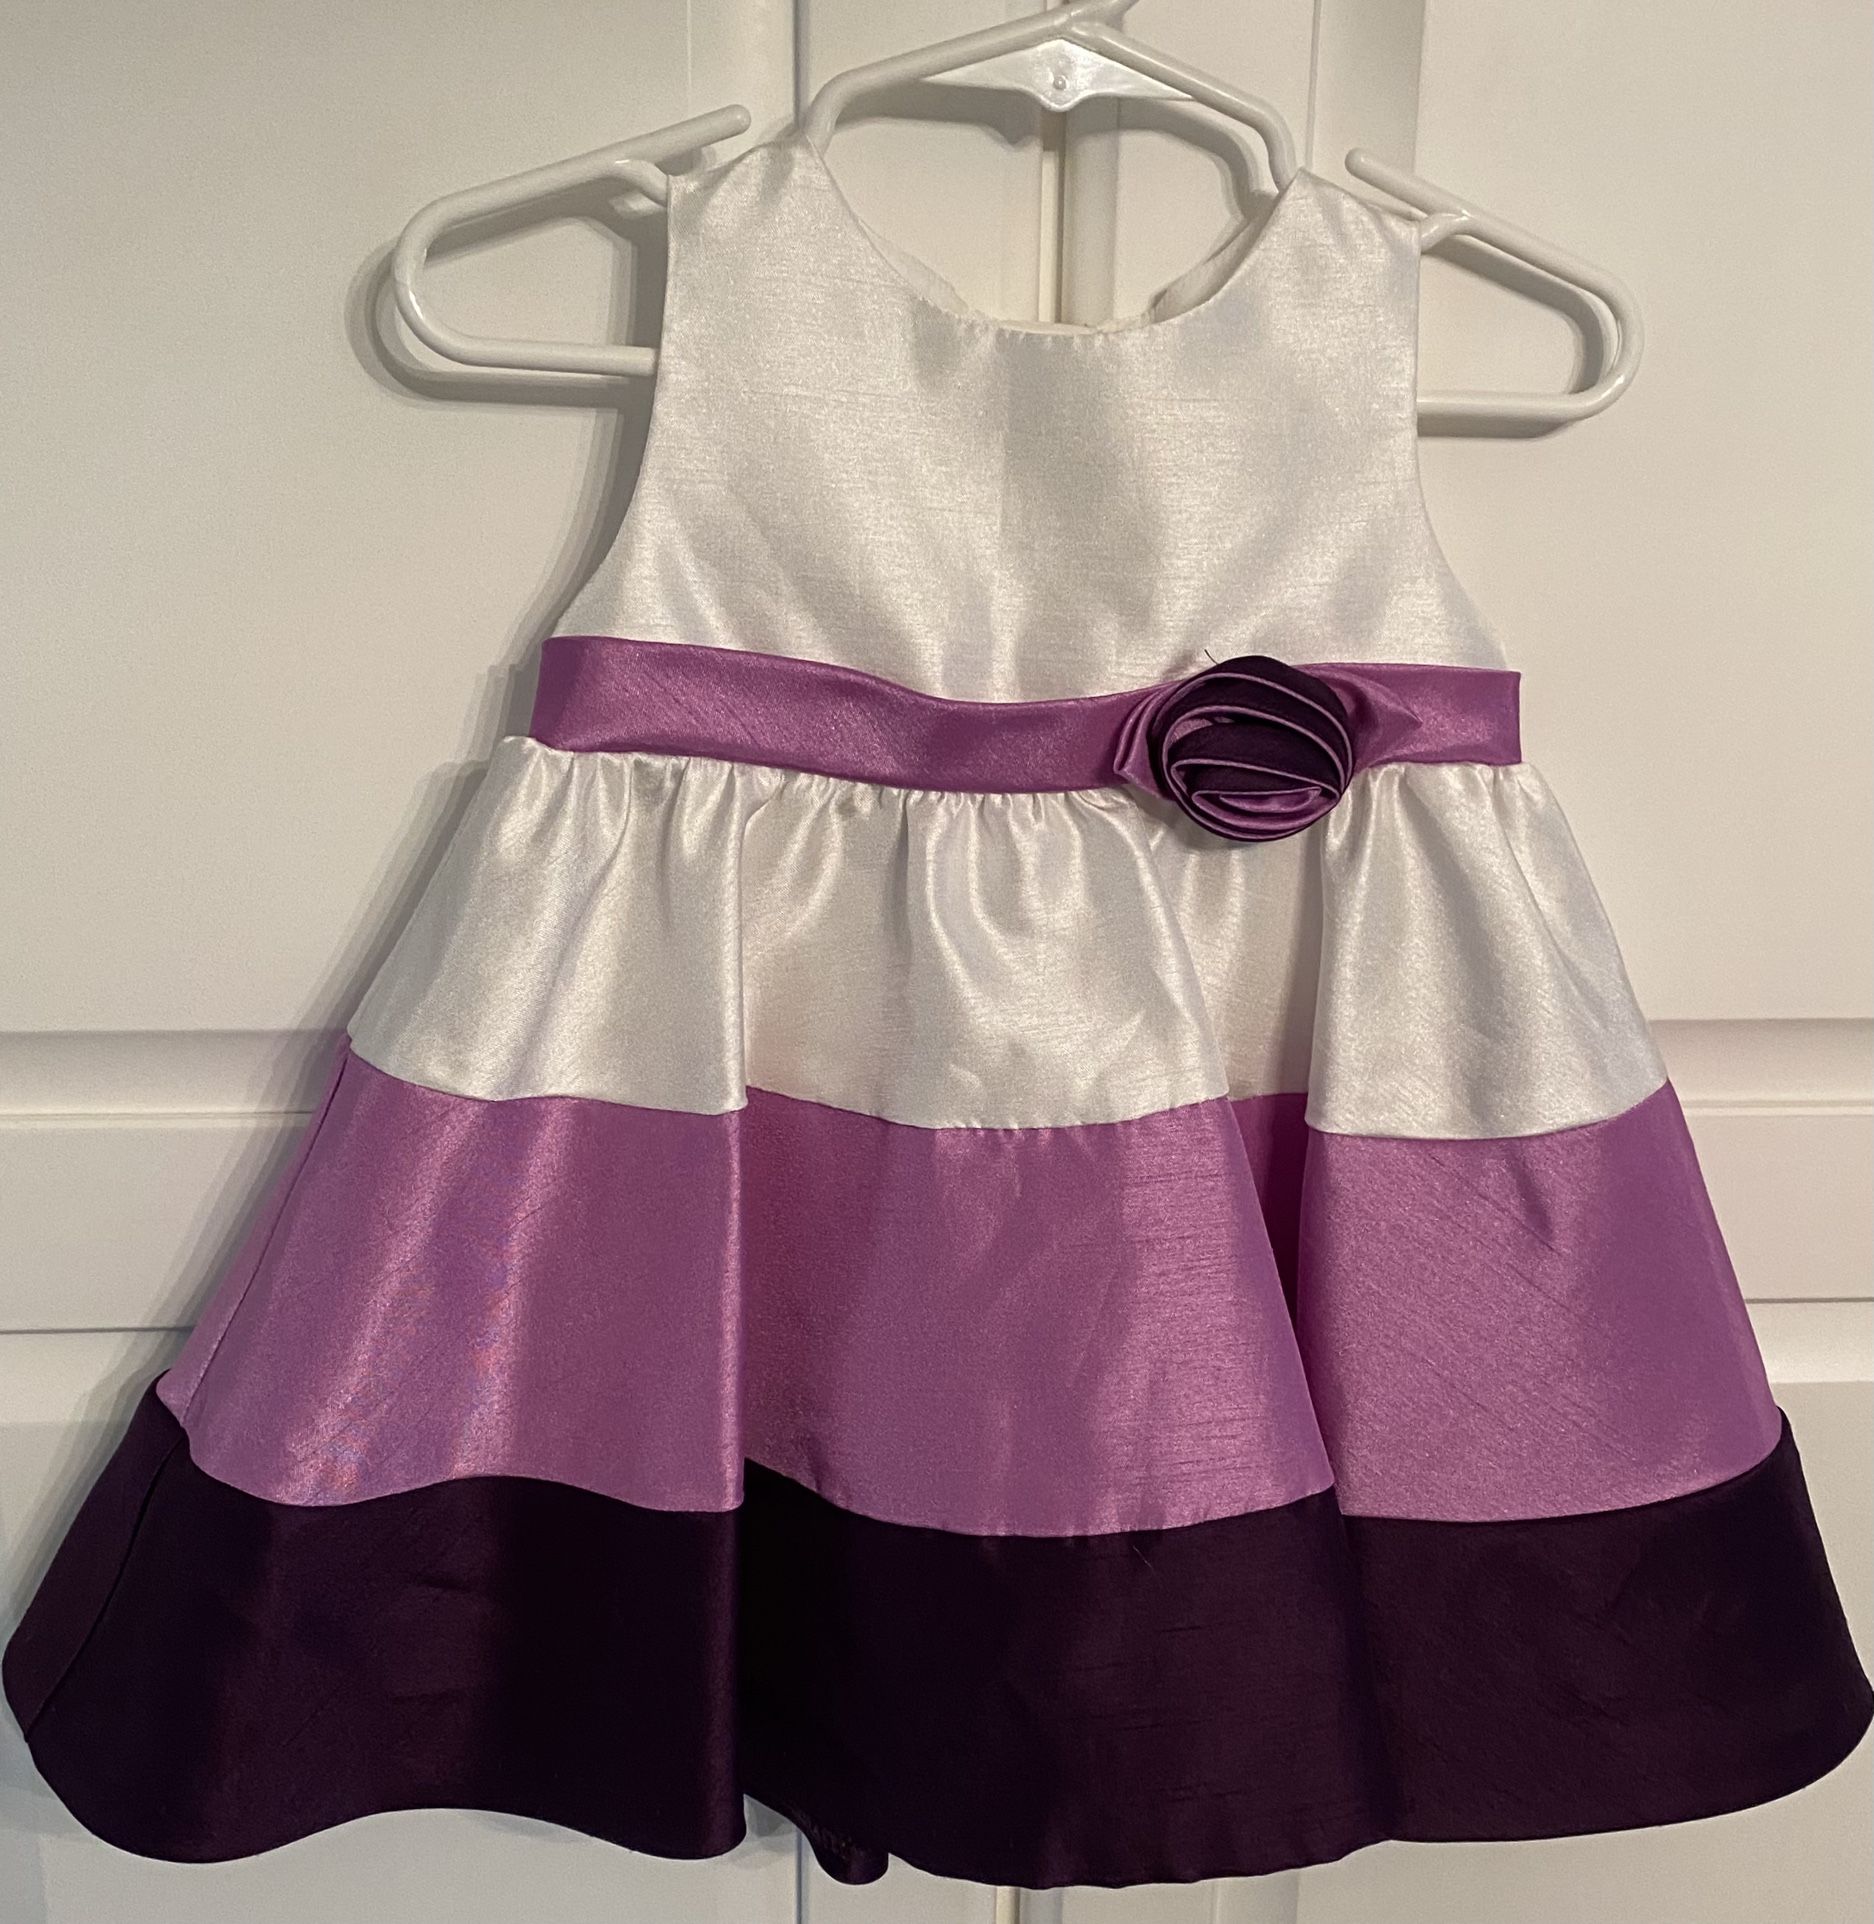 Rare Too! Soze 12 Months White Dress With Lilac And Purple Colors 